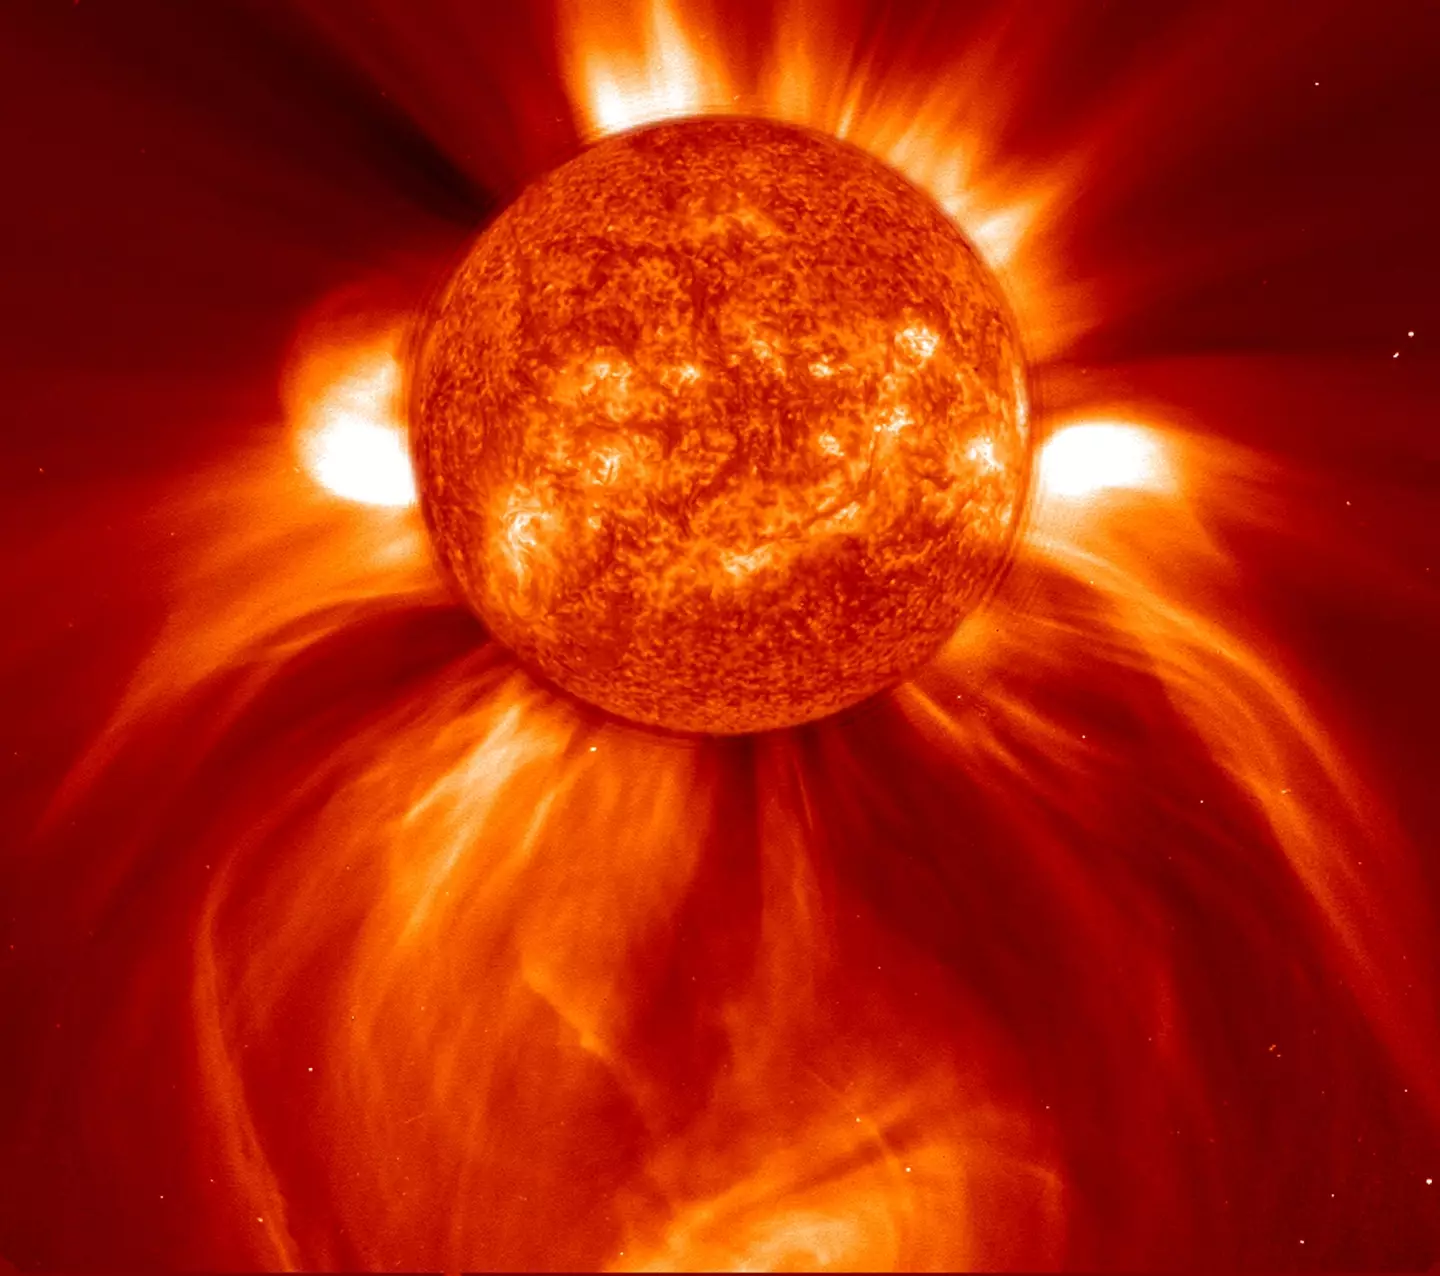 Explosions on surface of the Sun (HUM Images/Universal Images Group via Getty Images)